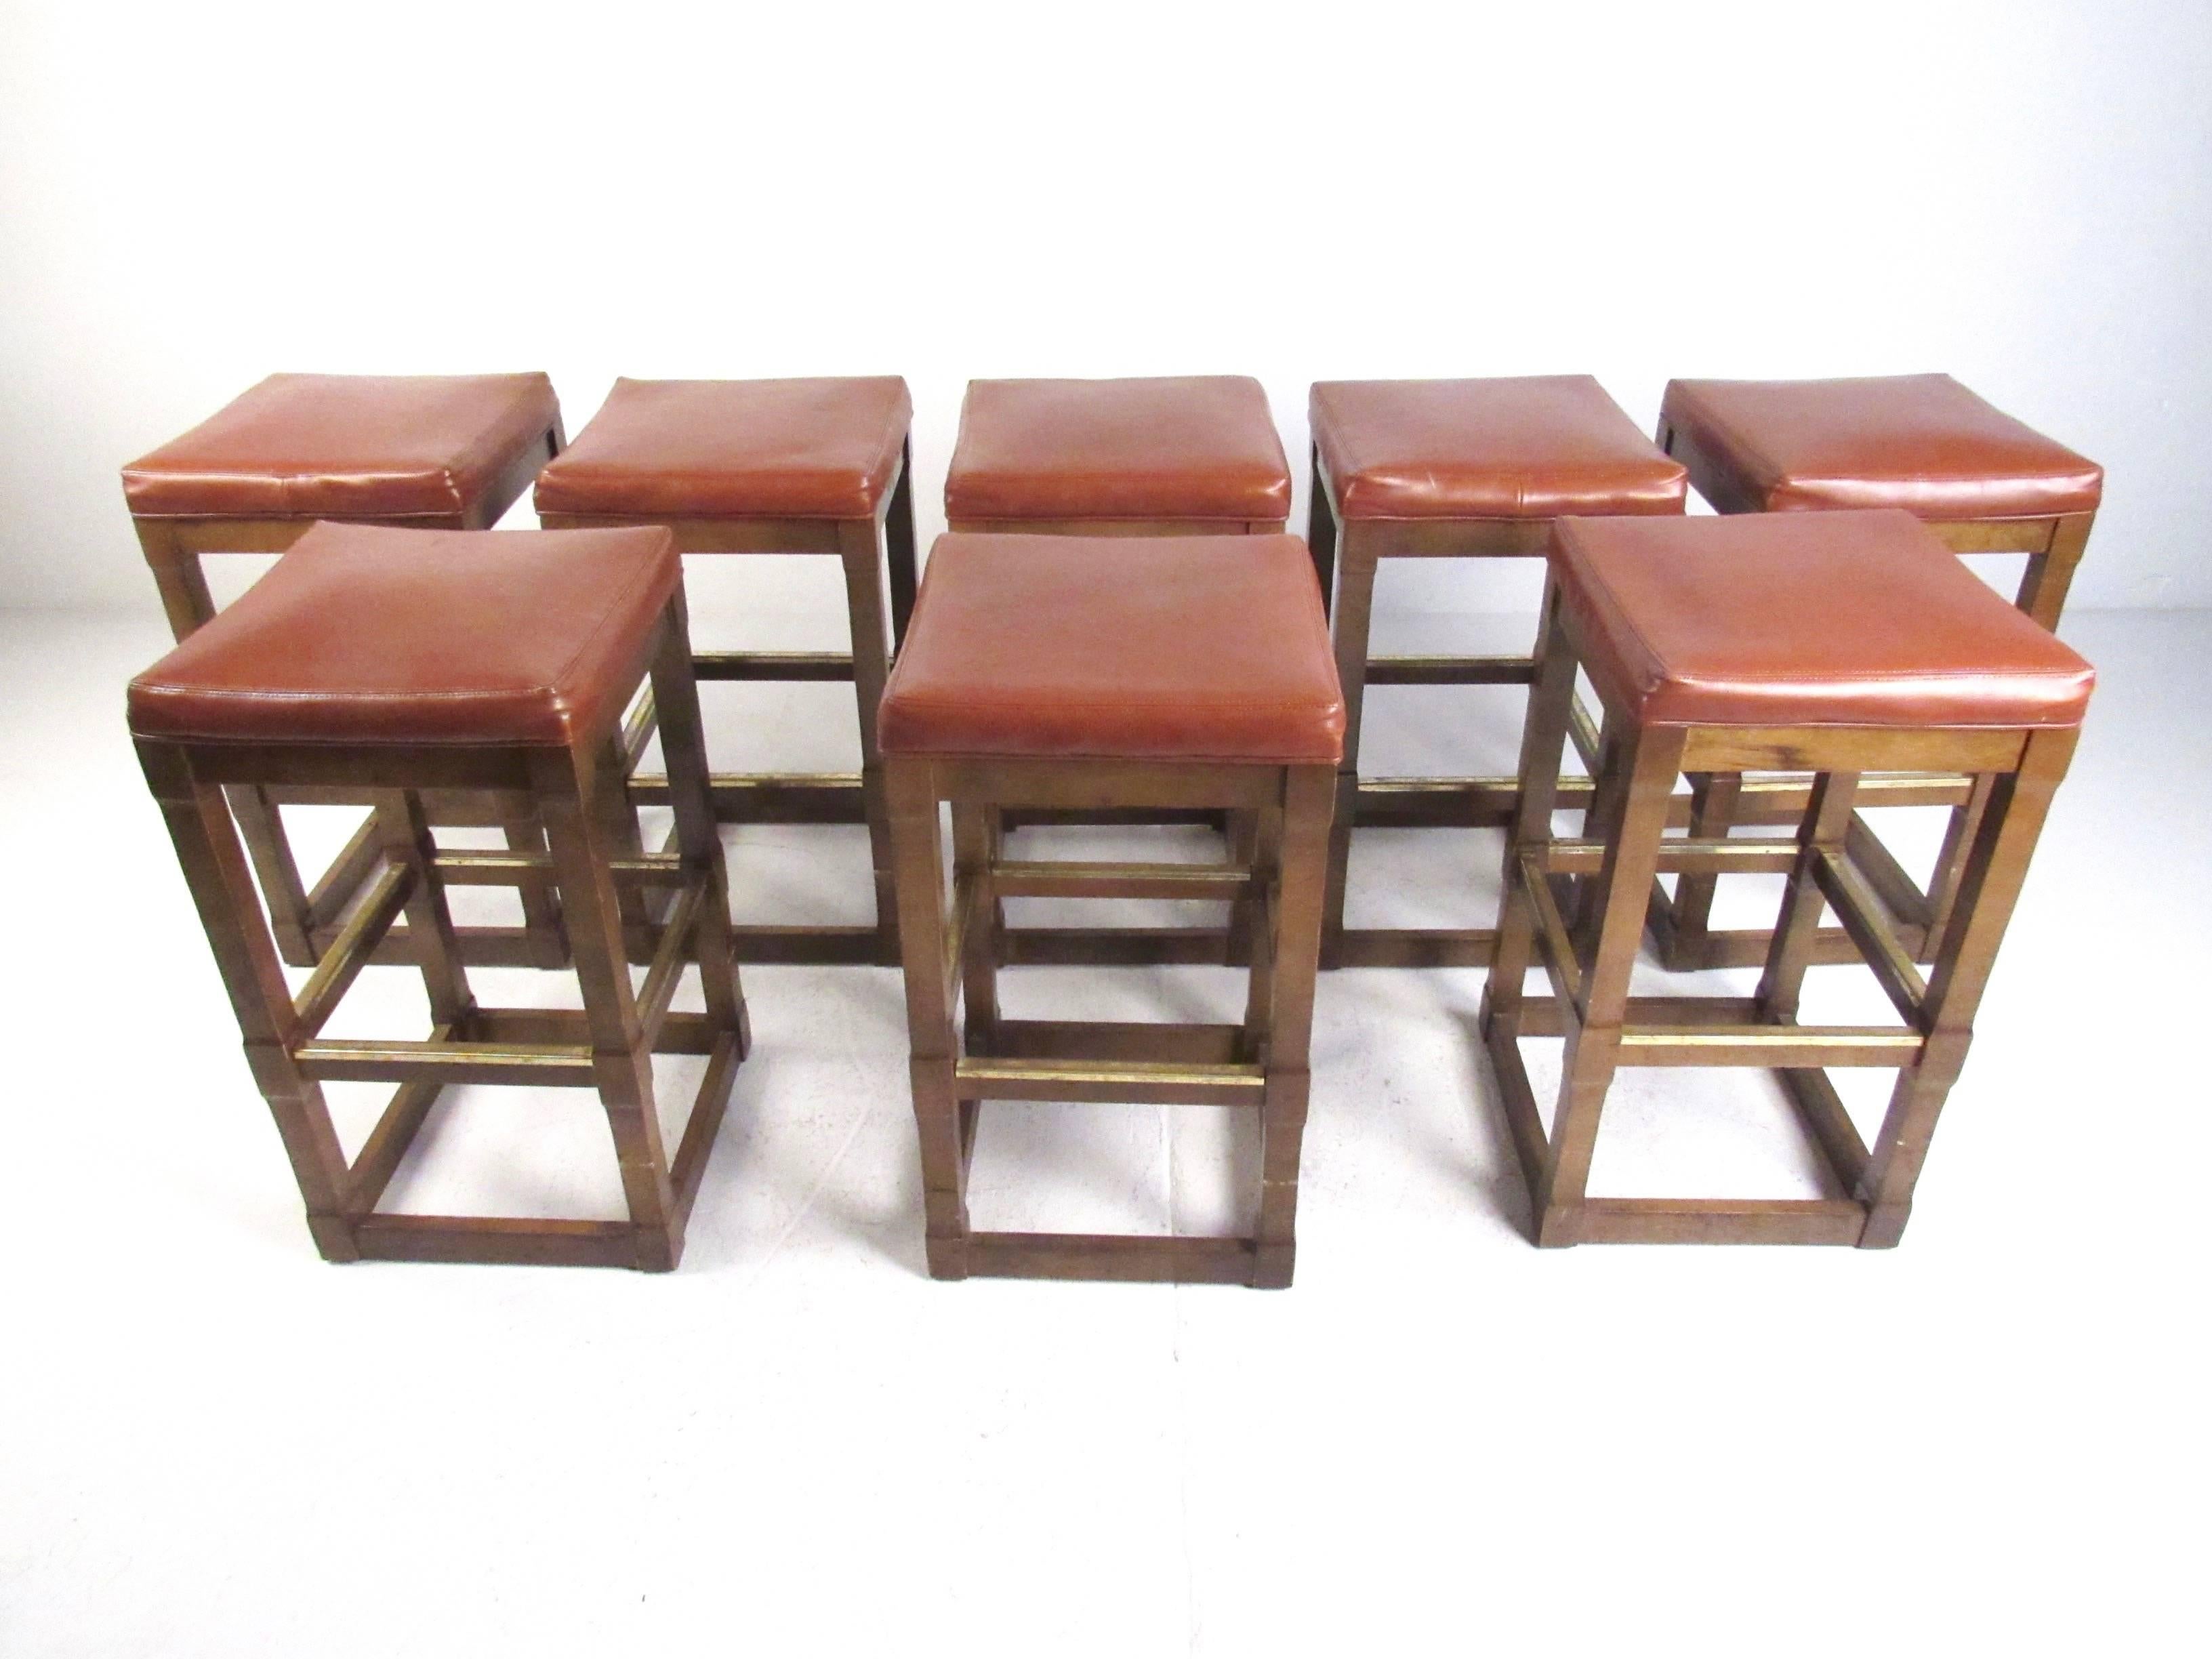 This stylish set of eight walnut counter stools feature sturdy square bases with upholstered vinyl tops. Brass trim on stretchers and tapered frame add to the vintage charm of the set, ideal for home or business counter seating. Please confirm item